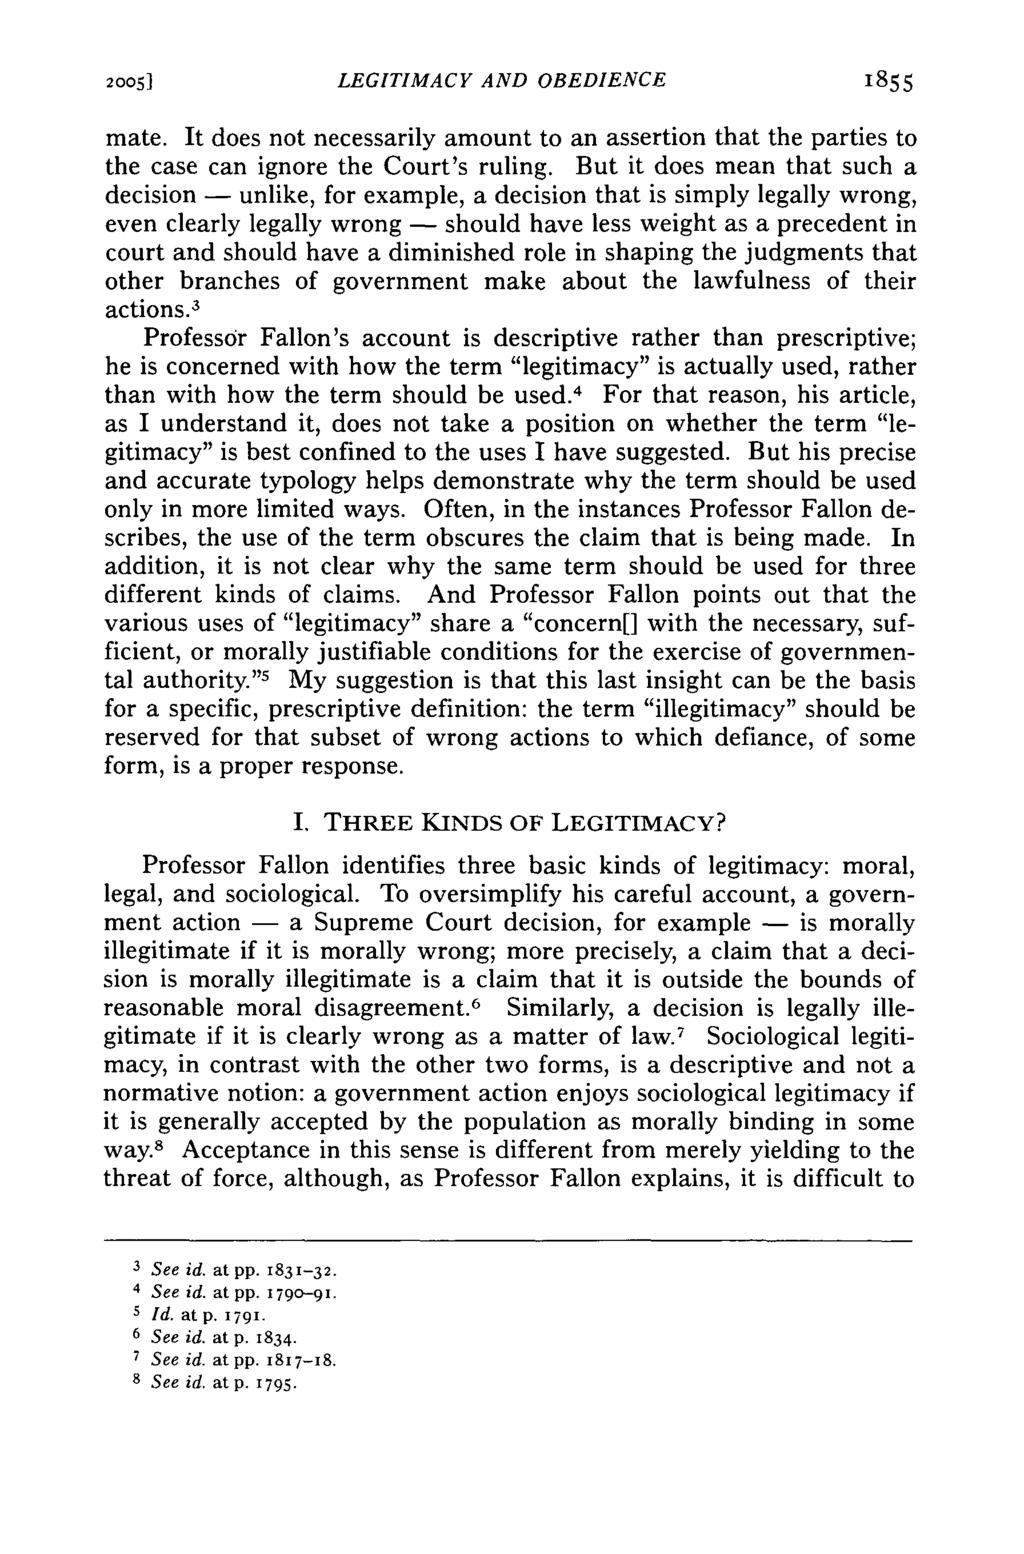 2005] LEGITIMACY AND OBEDIENCE 1855 mate. It does not necessarily amount to an assertion that the parties to the case can ignore the Court's ruling.